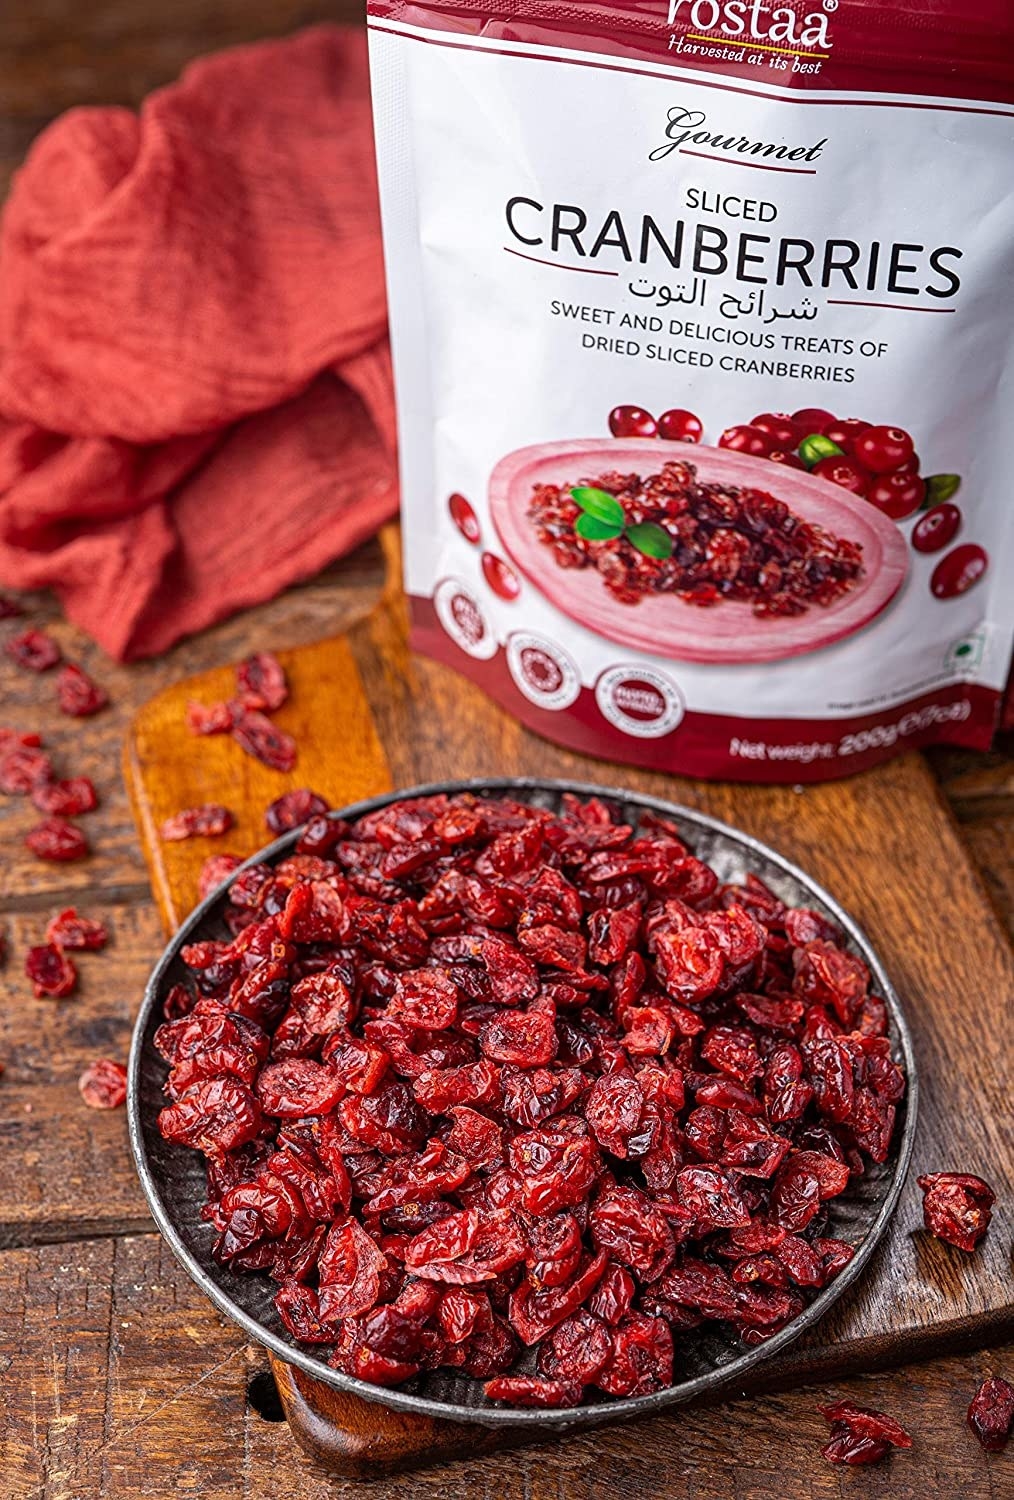 A bowl full of sliced cranberries kept beside their packet